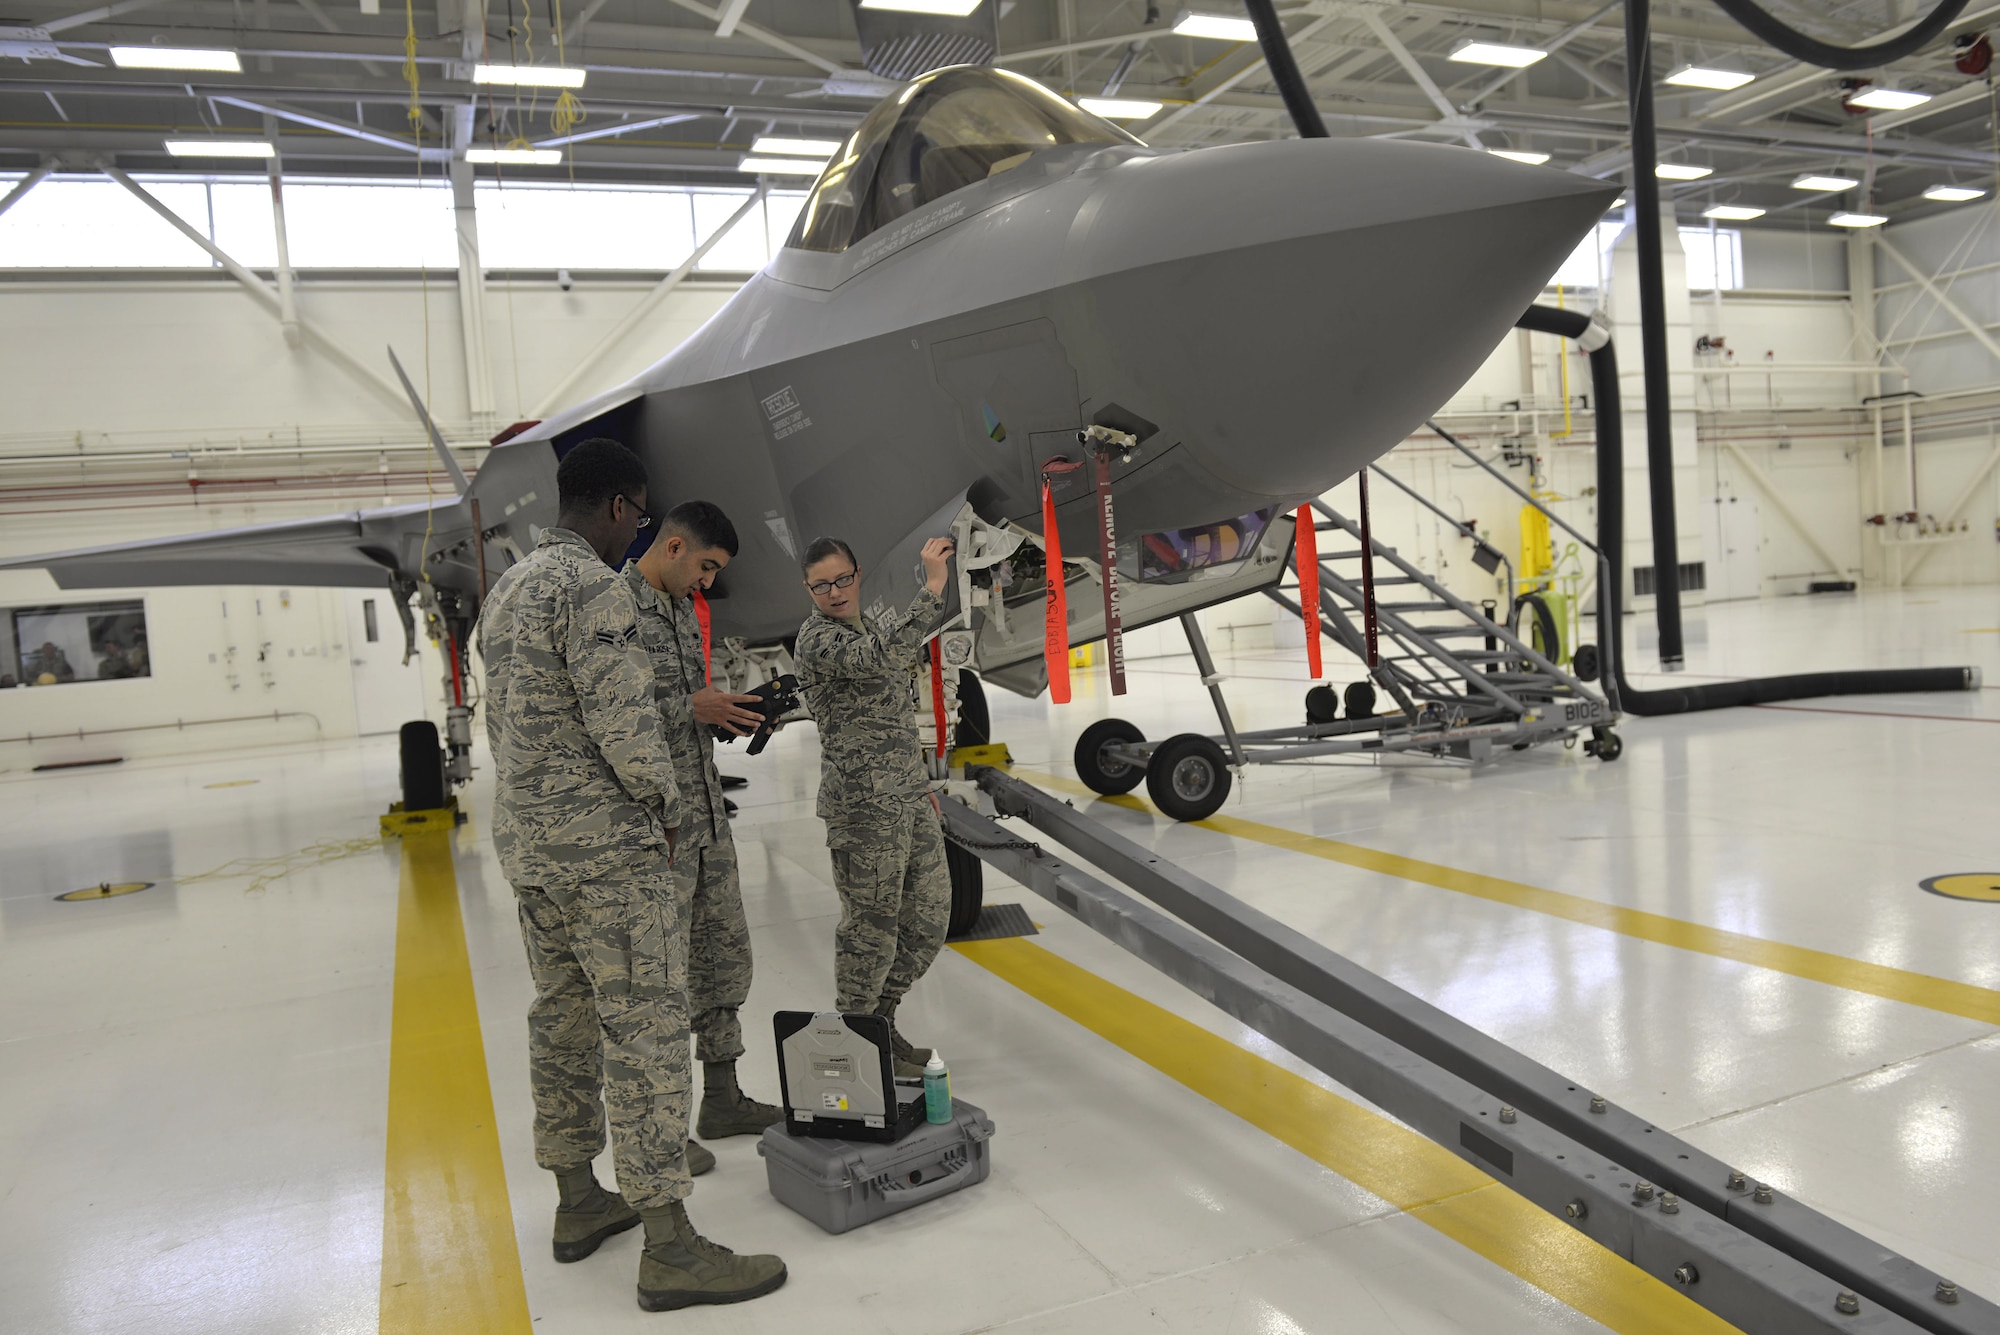 Nondestructive inspection Airmen inspect an F-35A Lightning II panel at Eglin Air Force Base, Fla., May 16, 2016. These specialists are responsible for inspecting the inner layers of metal objects to identify possible defects. The nondestructive inspection section utilizes non-invasive equipment such as transducers, x-rays and ultrasound machines to look for imperfections in the inner layers of metal on an aircraft to preserve the stealth of the aircraft. (U.S. Air Force photo/Senior Airman Andrea Posey)